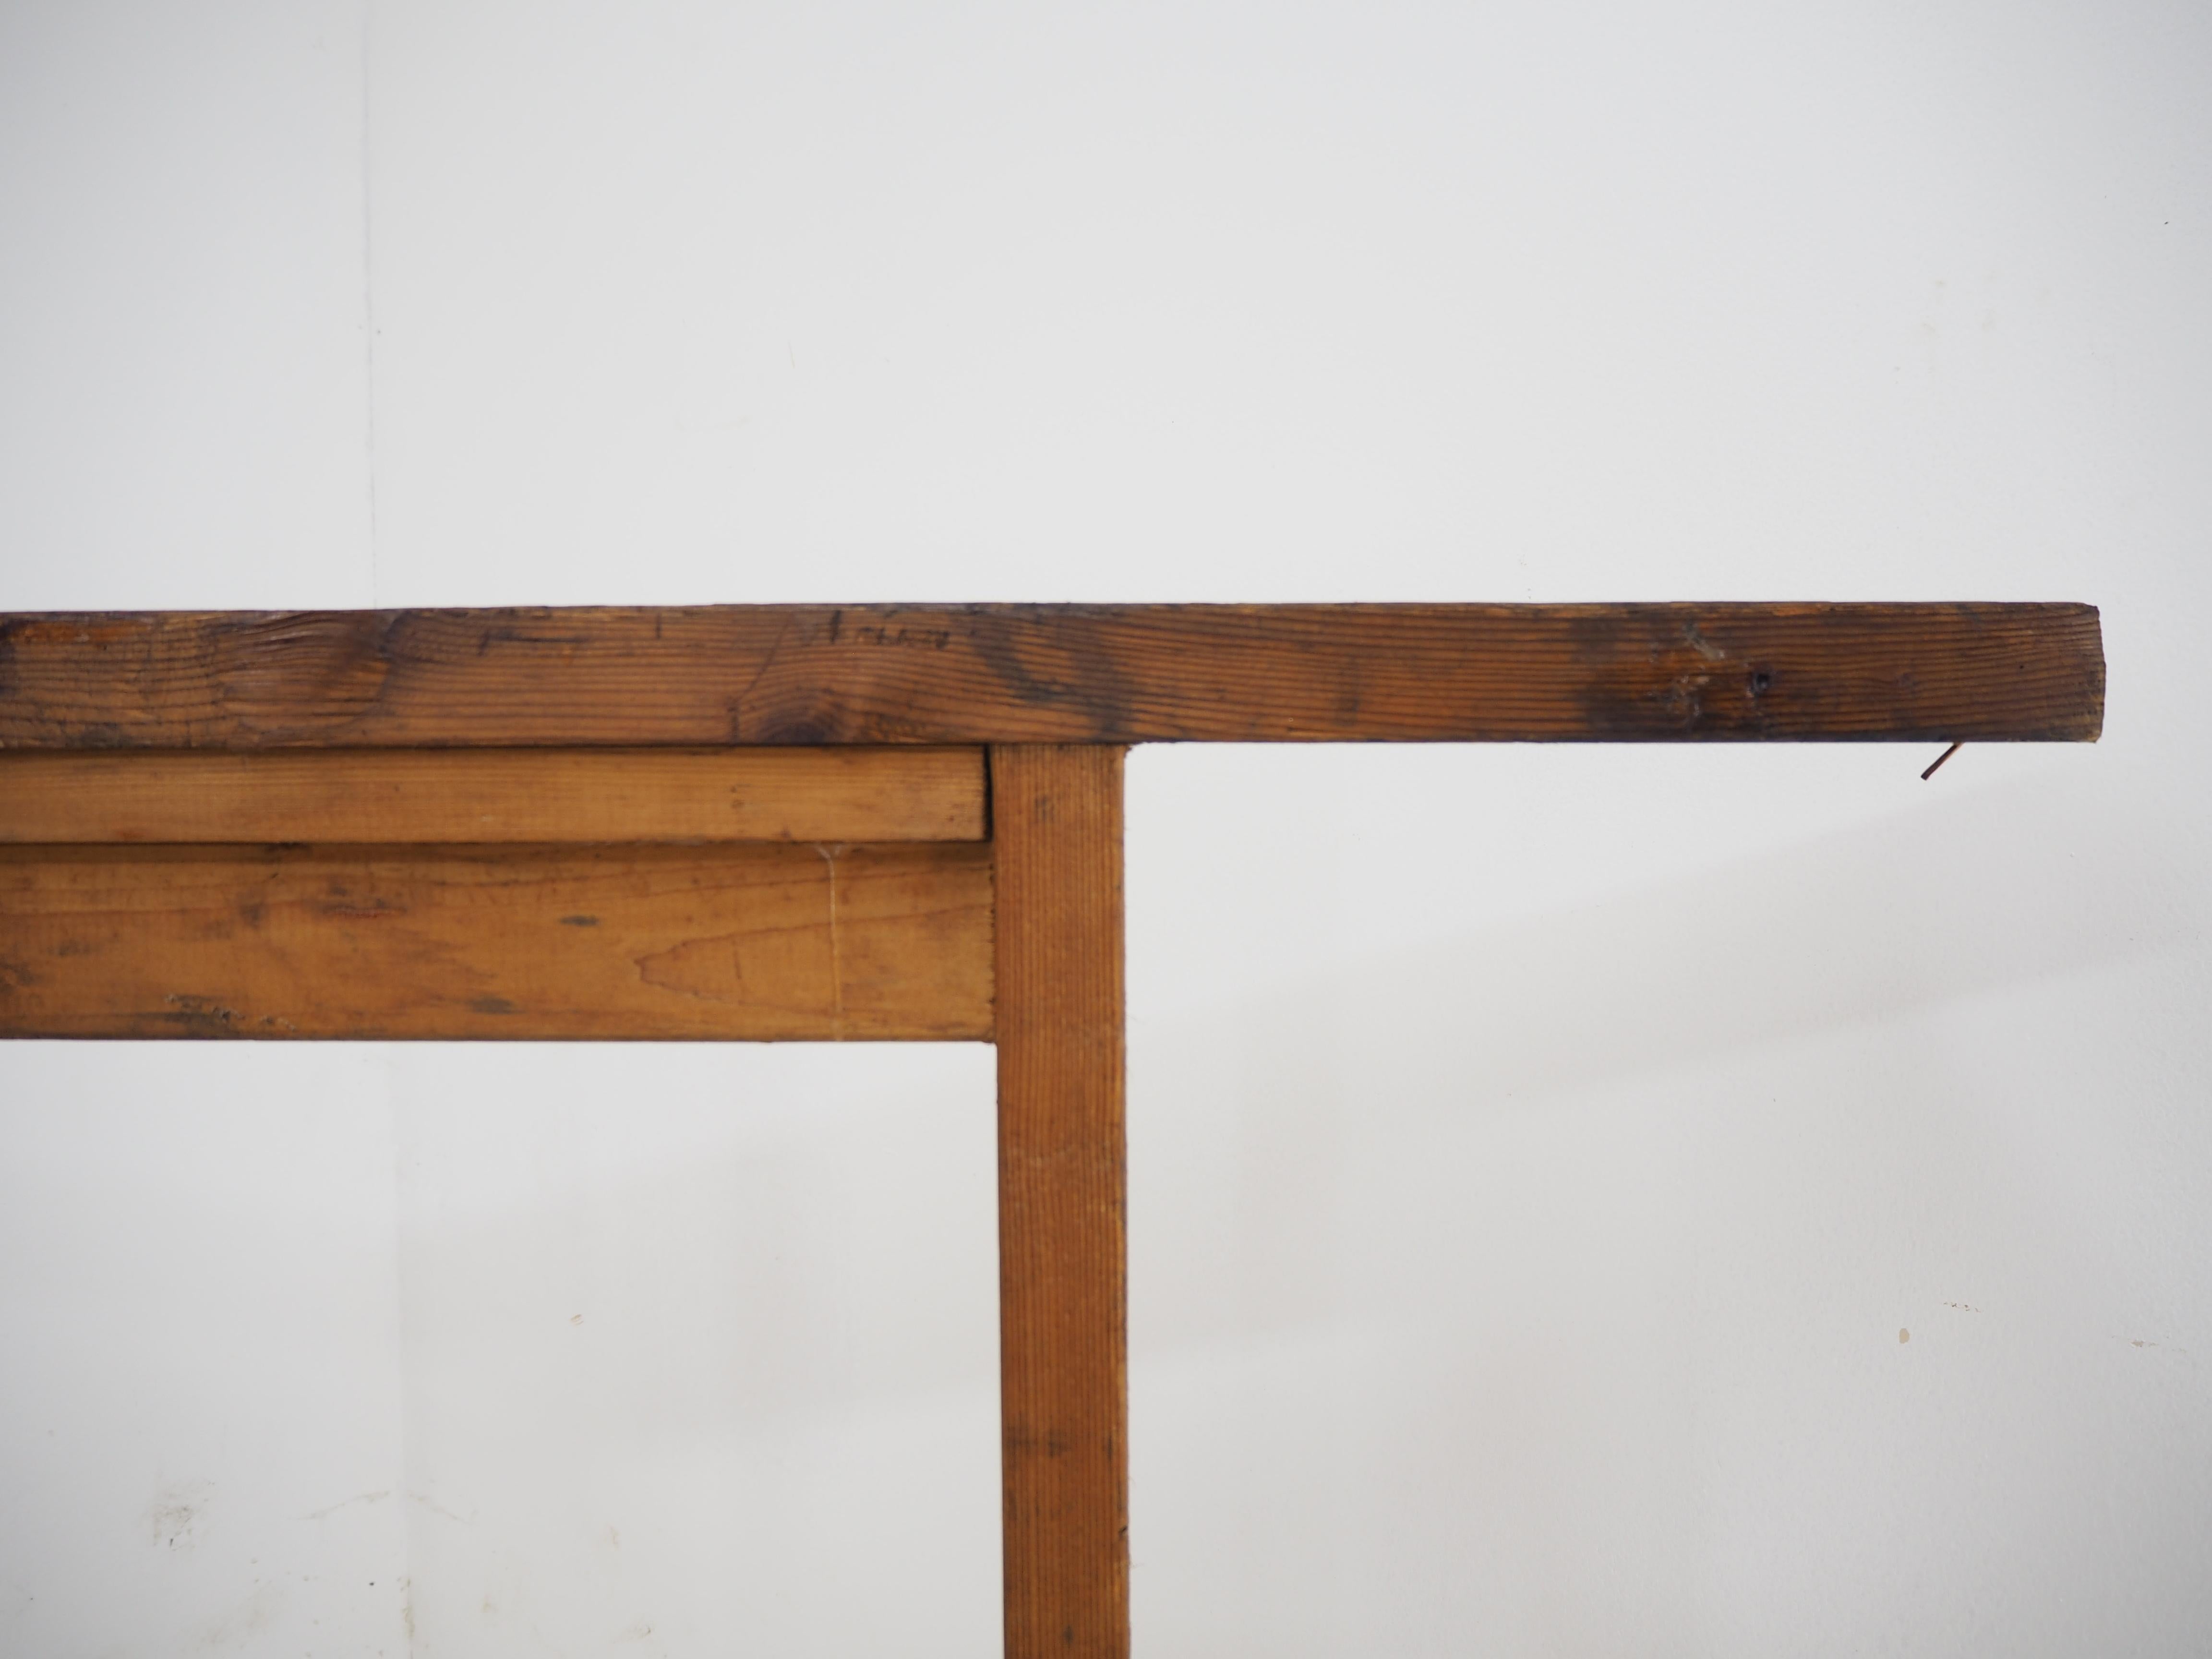 Pair of Industrial Wood Trestle Table Bases, Early 20th Century For Sale 9